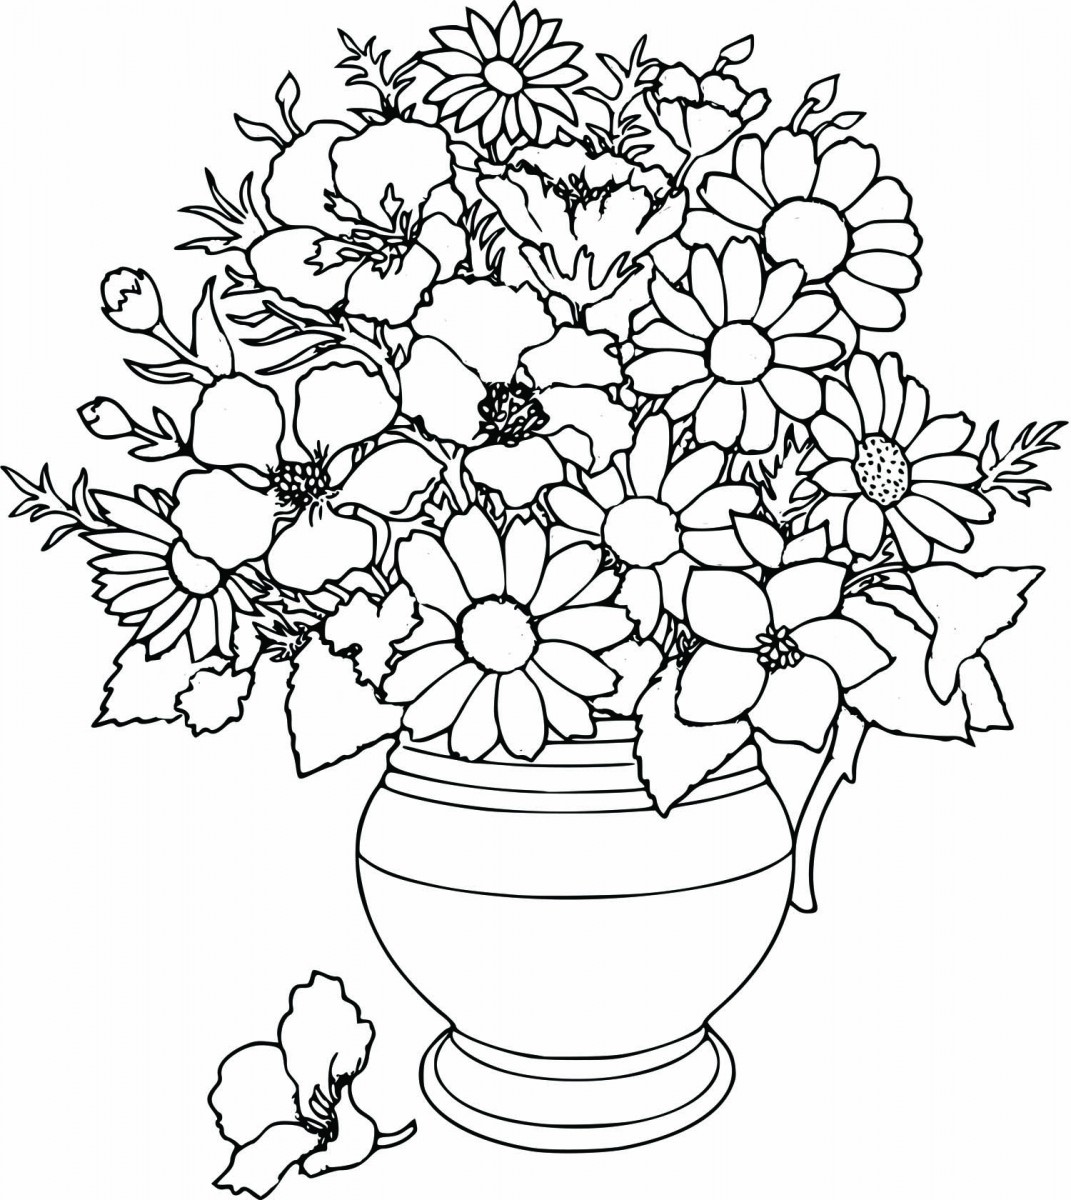 Flower Coloring Pages To Print